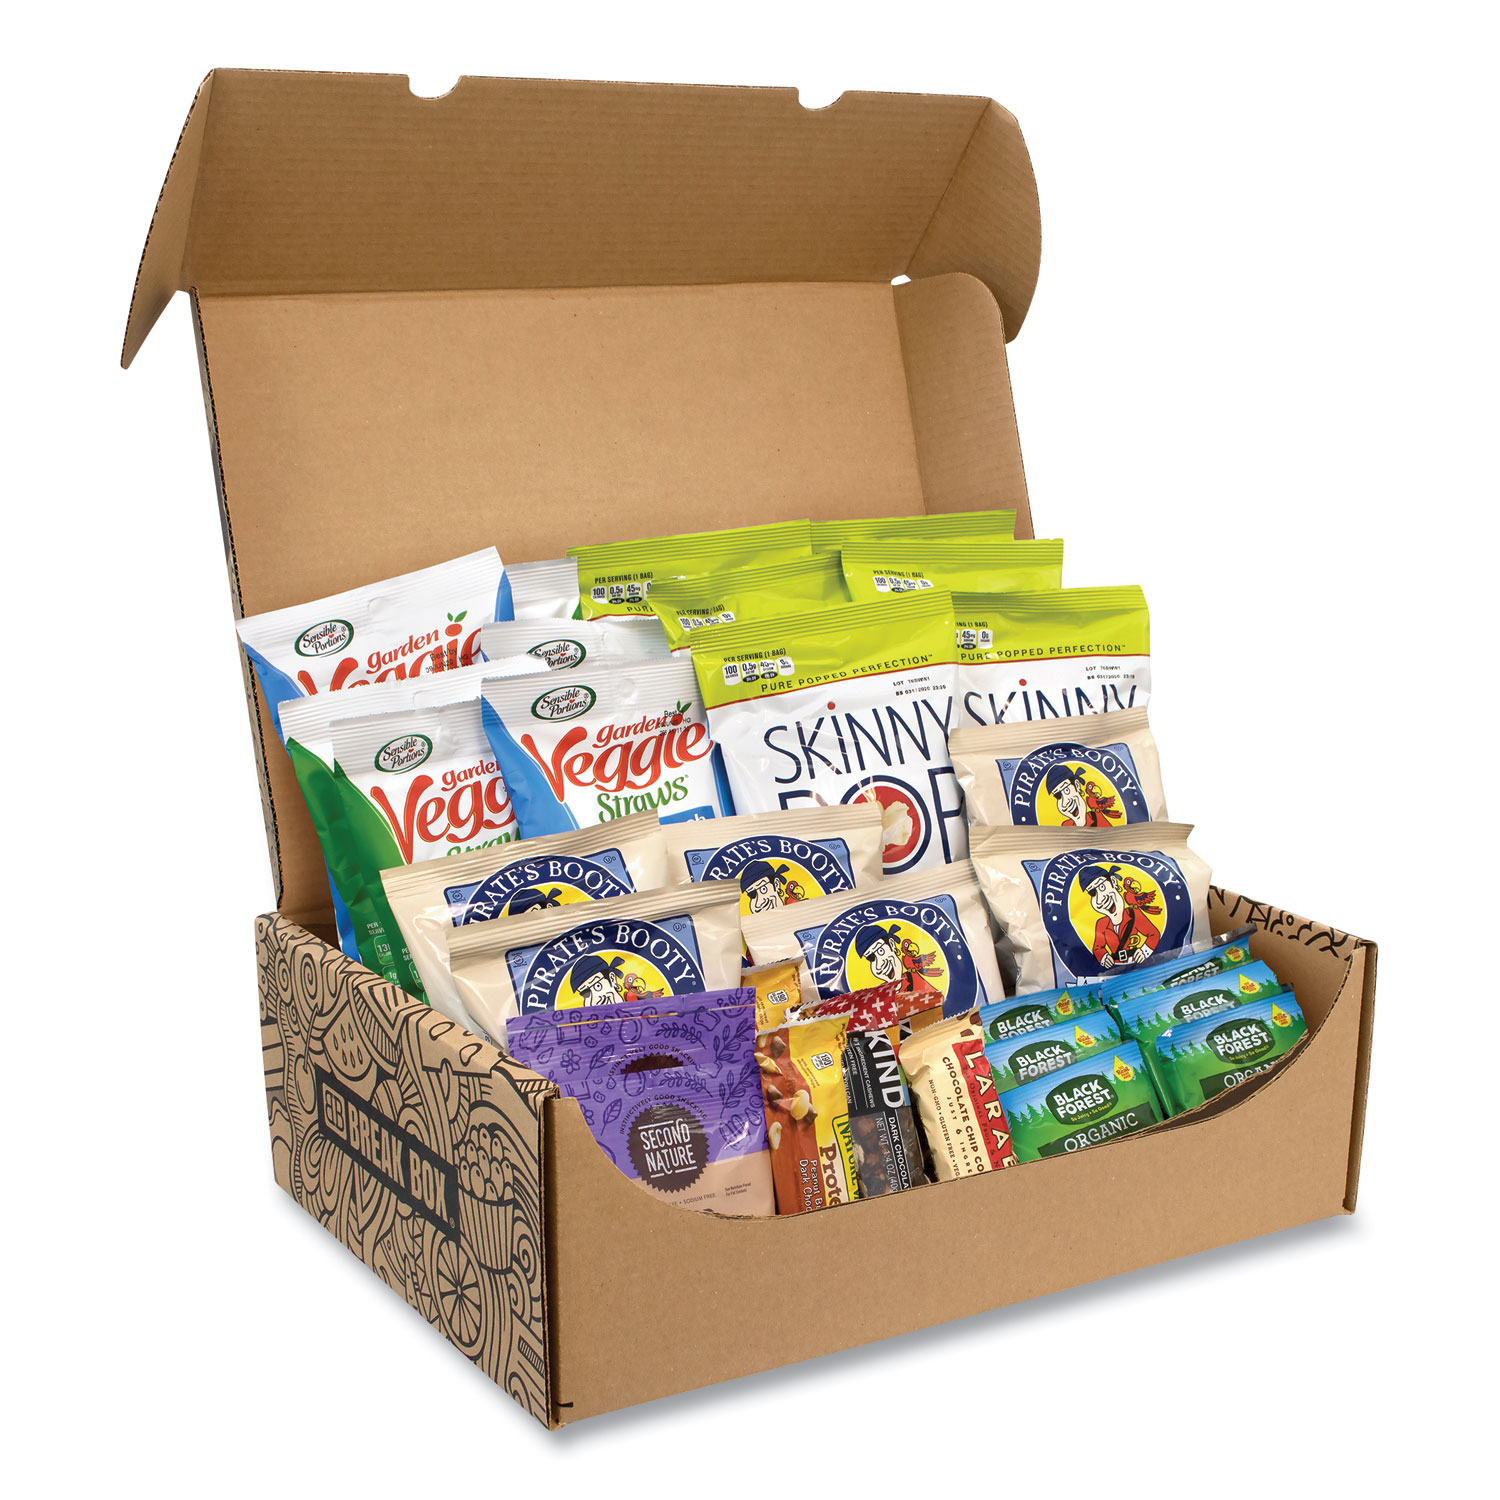 Snack Box Pros Gluten Free Snack Box, 32 Assorted Snacks, Free Delivery in 1-4 Business Days